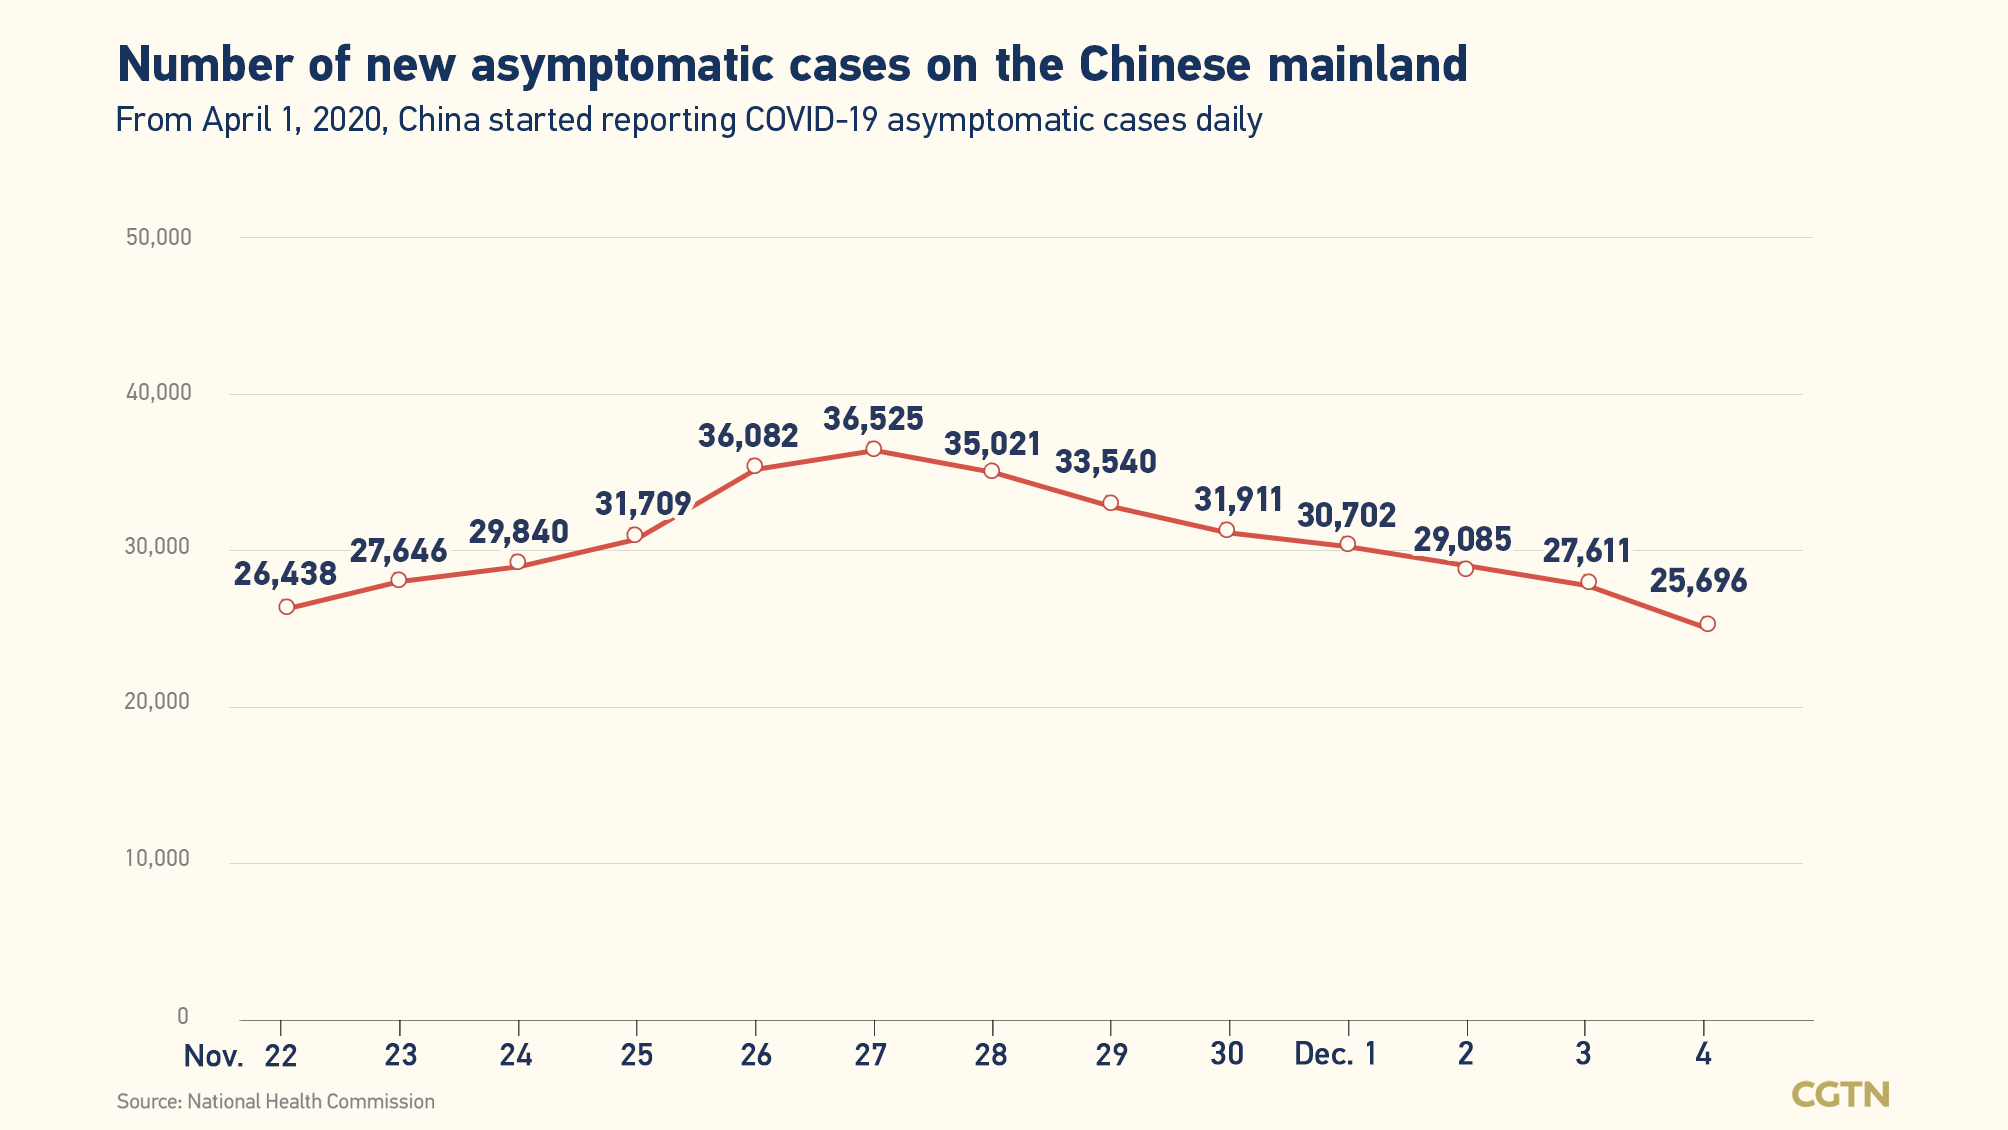 Chinese mainland records 4,318 new confirmed COVID-19 cases